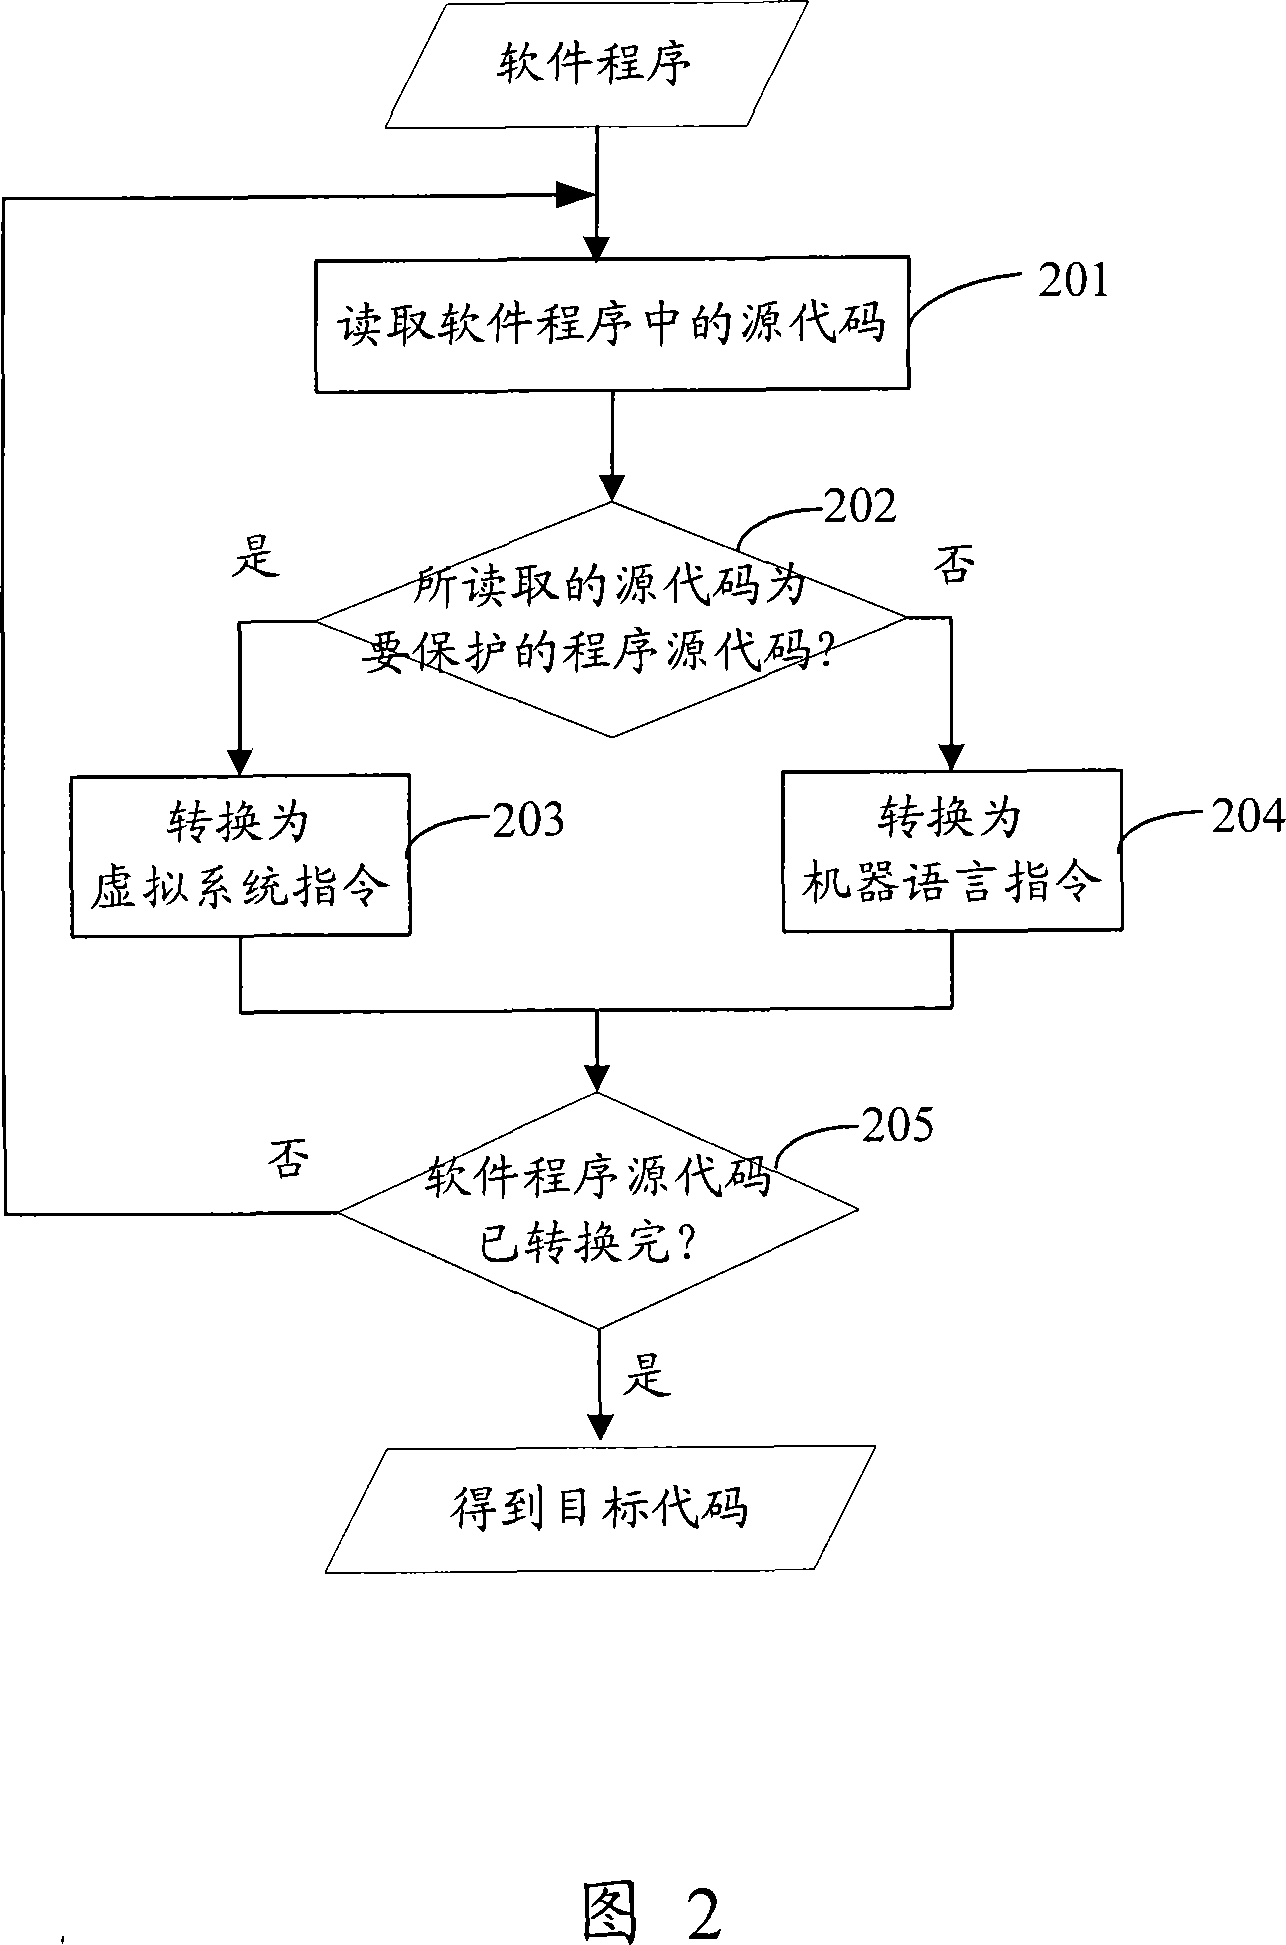 Software program protection method, device and system